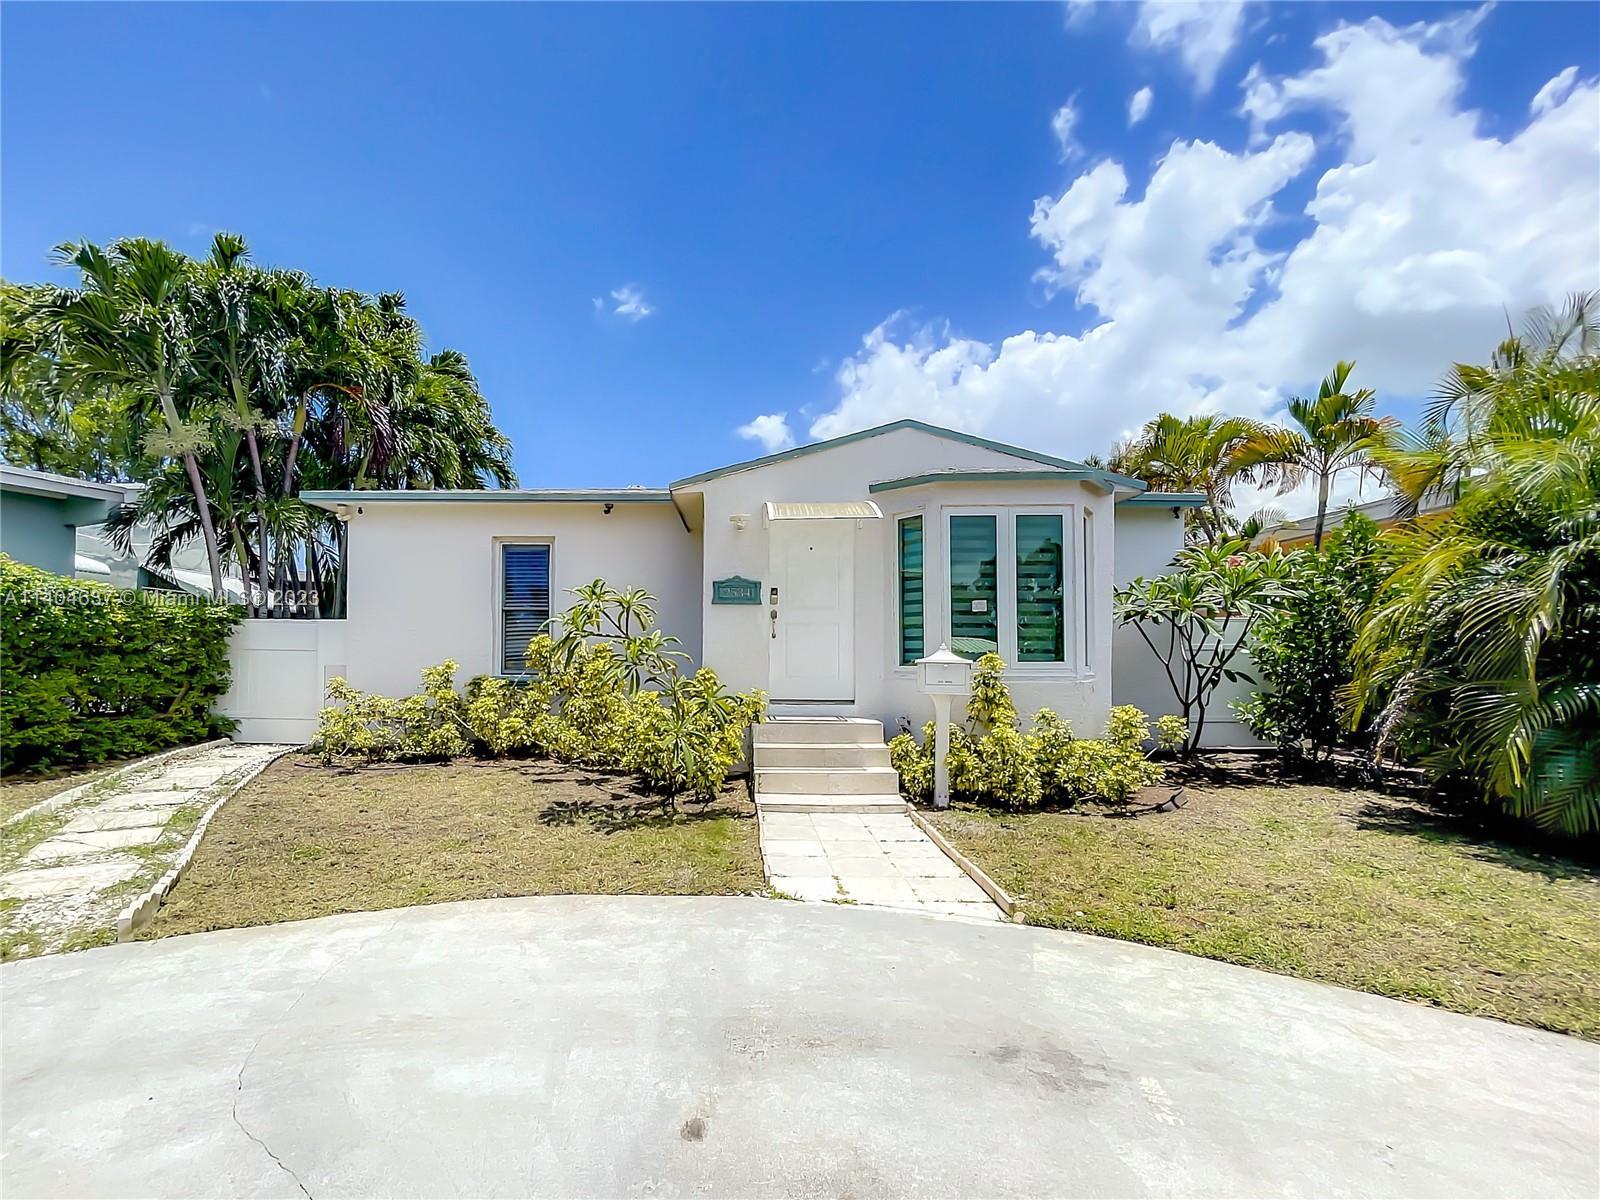 Photo of 2534 Wilson St in Hollywood, FL